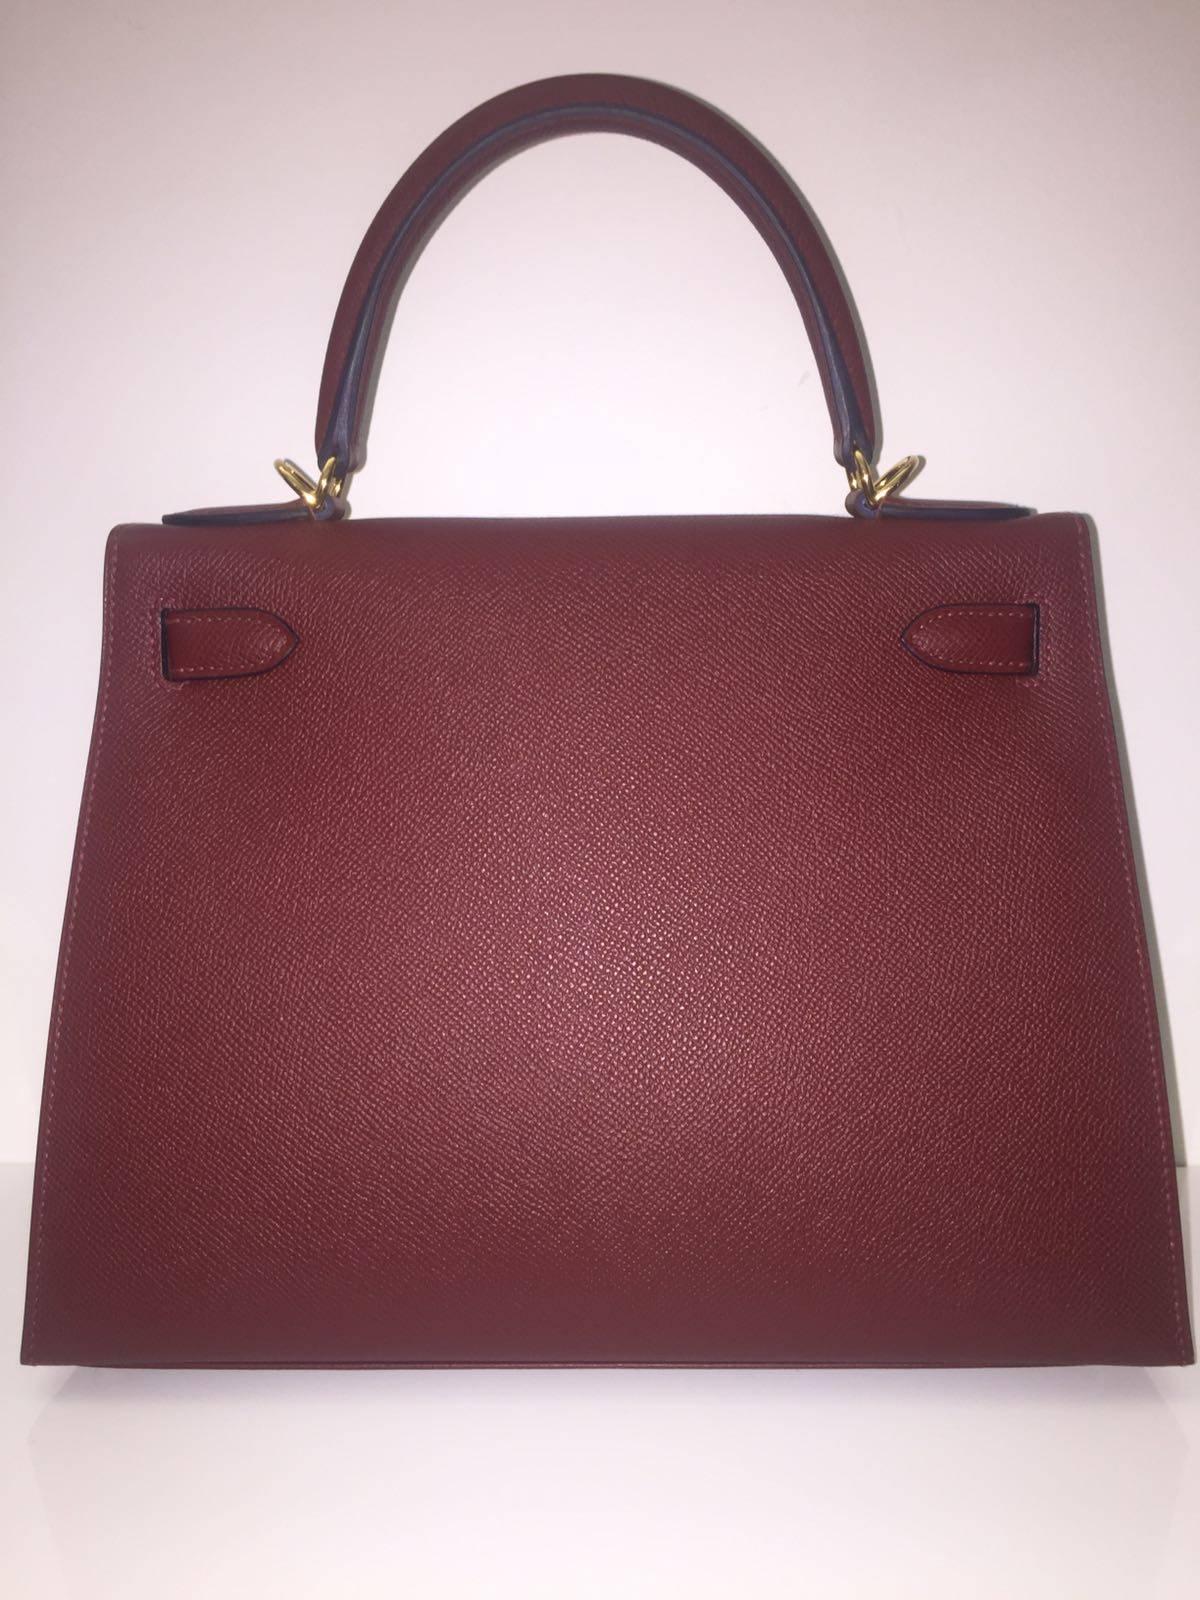 Hermes 
Kelly Size 25
Epsom Leather 
Colour Rouge H
Gold Hardware
store fresh, comes with receipt and full set (dust bag, box...) 
Hydeparkfashion specializes in sourcing and delivering authentic luxury handbags, mainly Hermes, to client around the